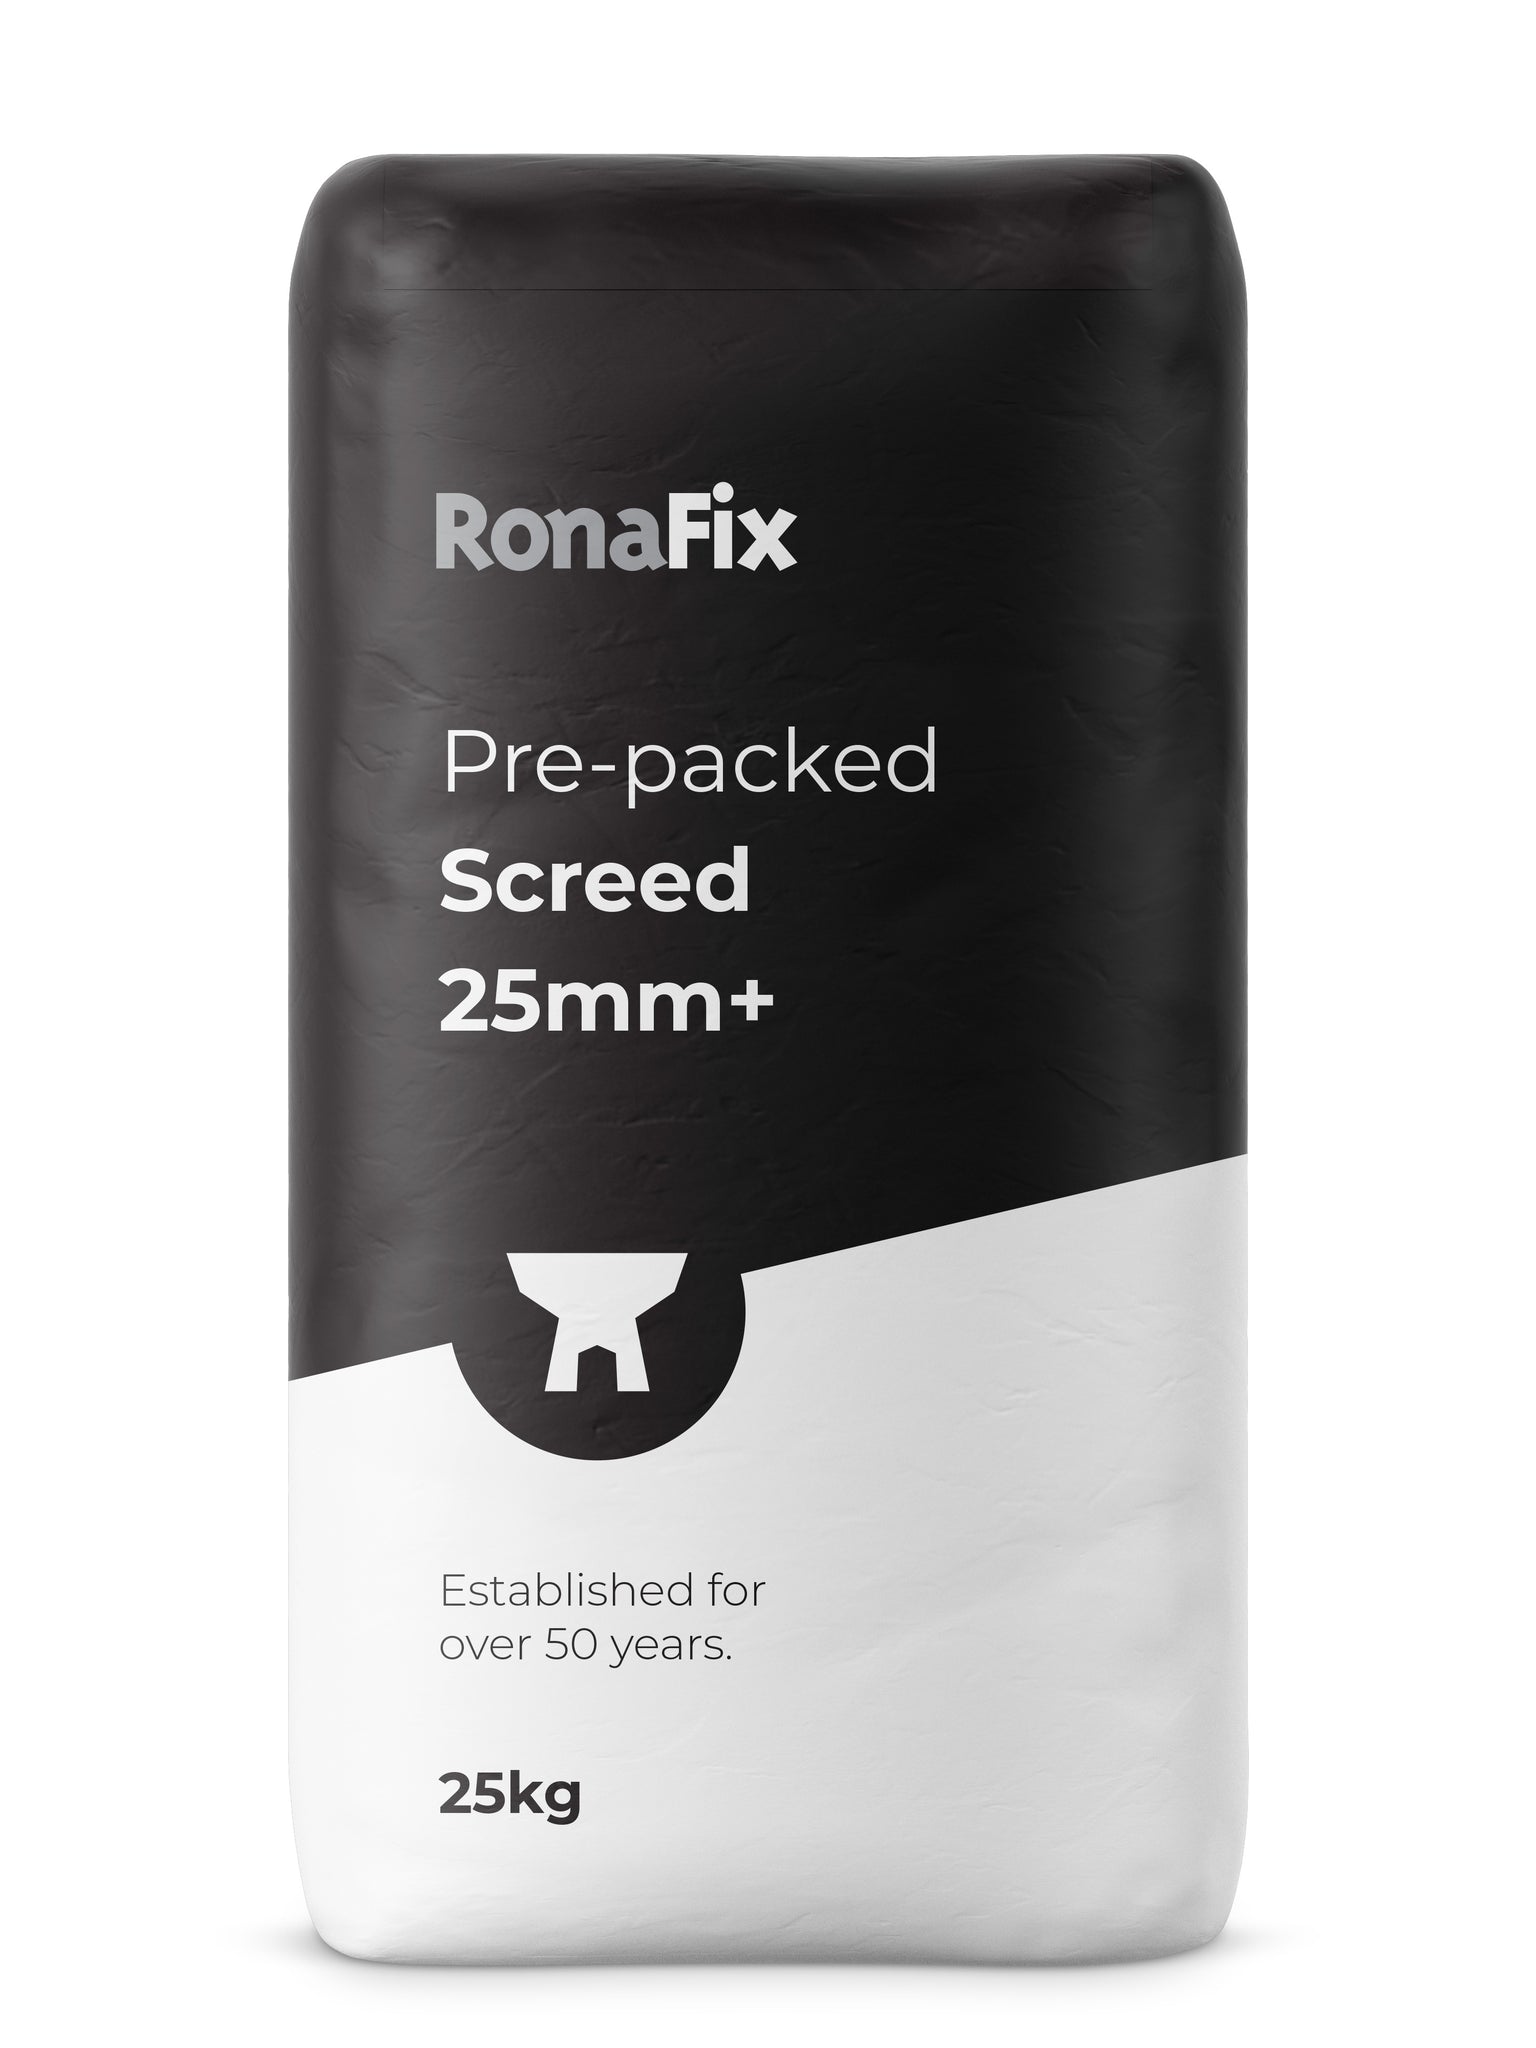 Ronafix Pre-packed Screed 25mm+ - Levelling screed